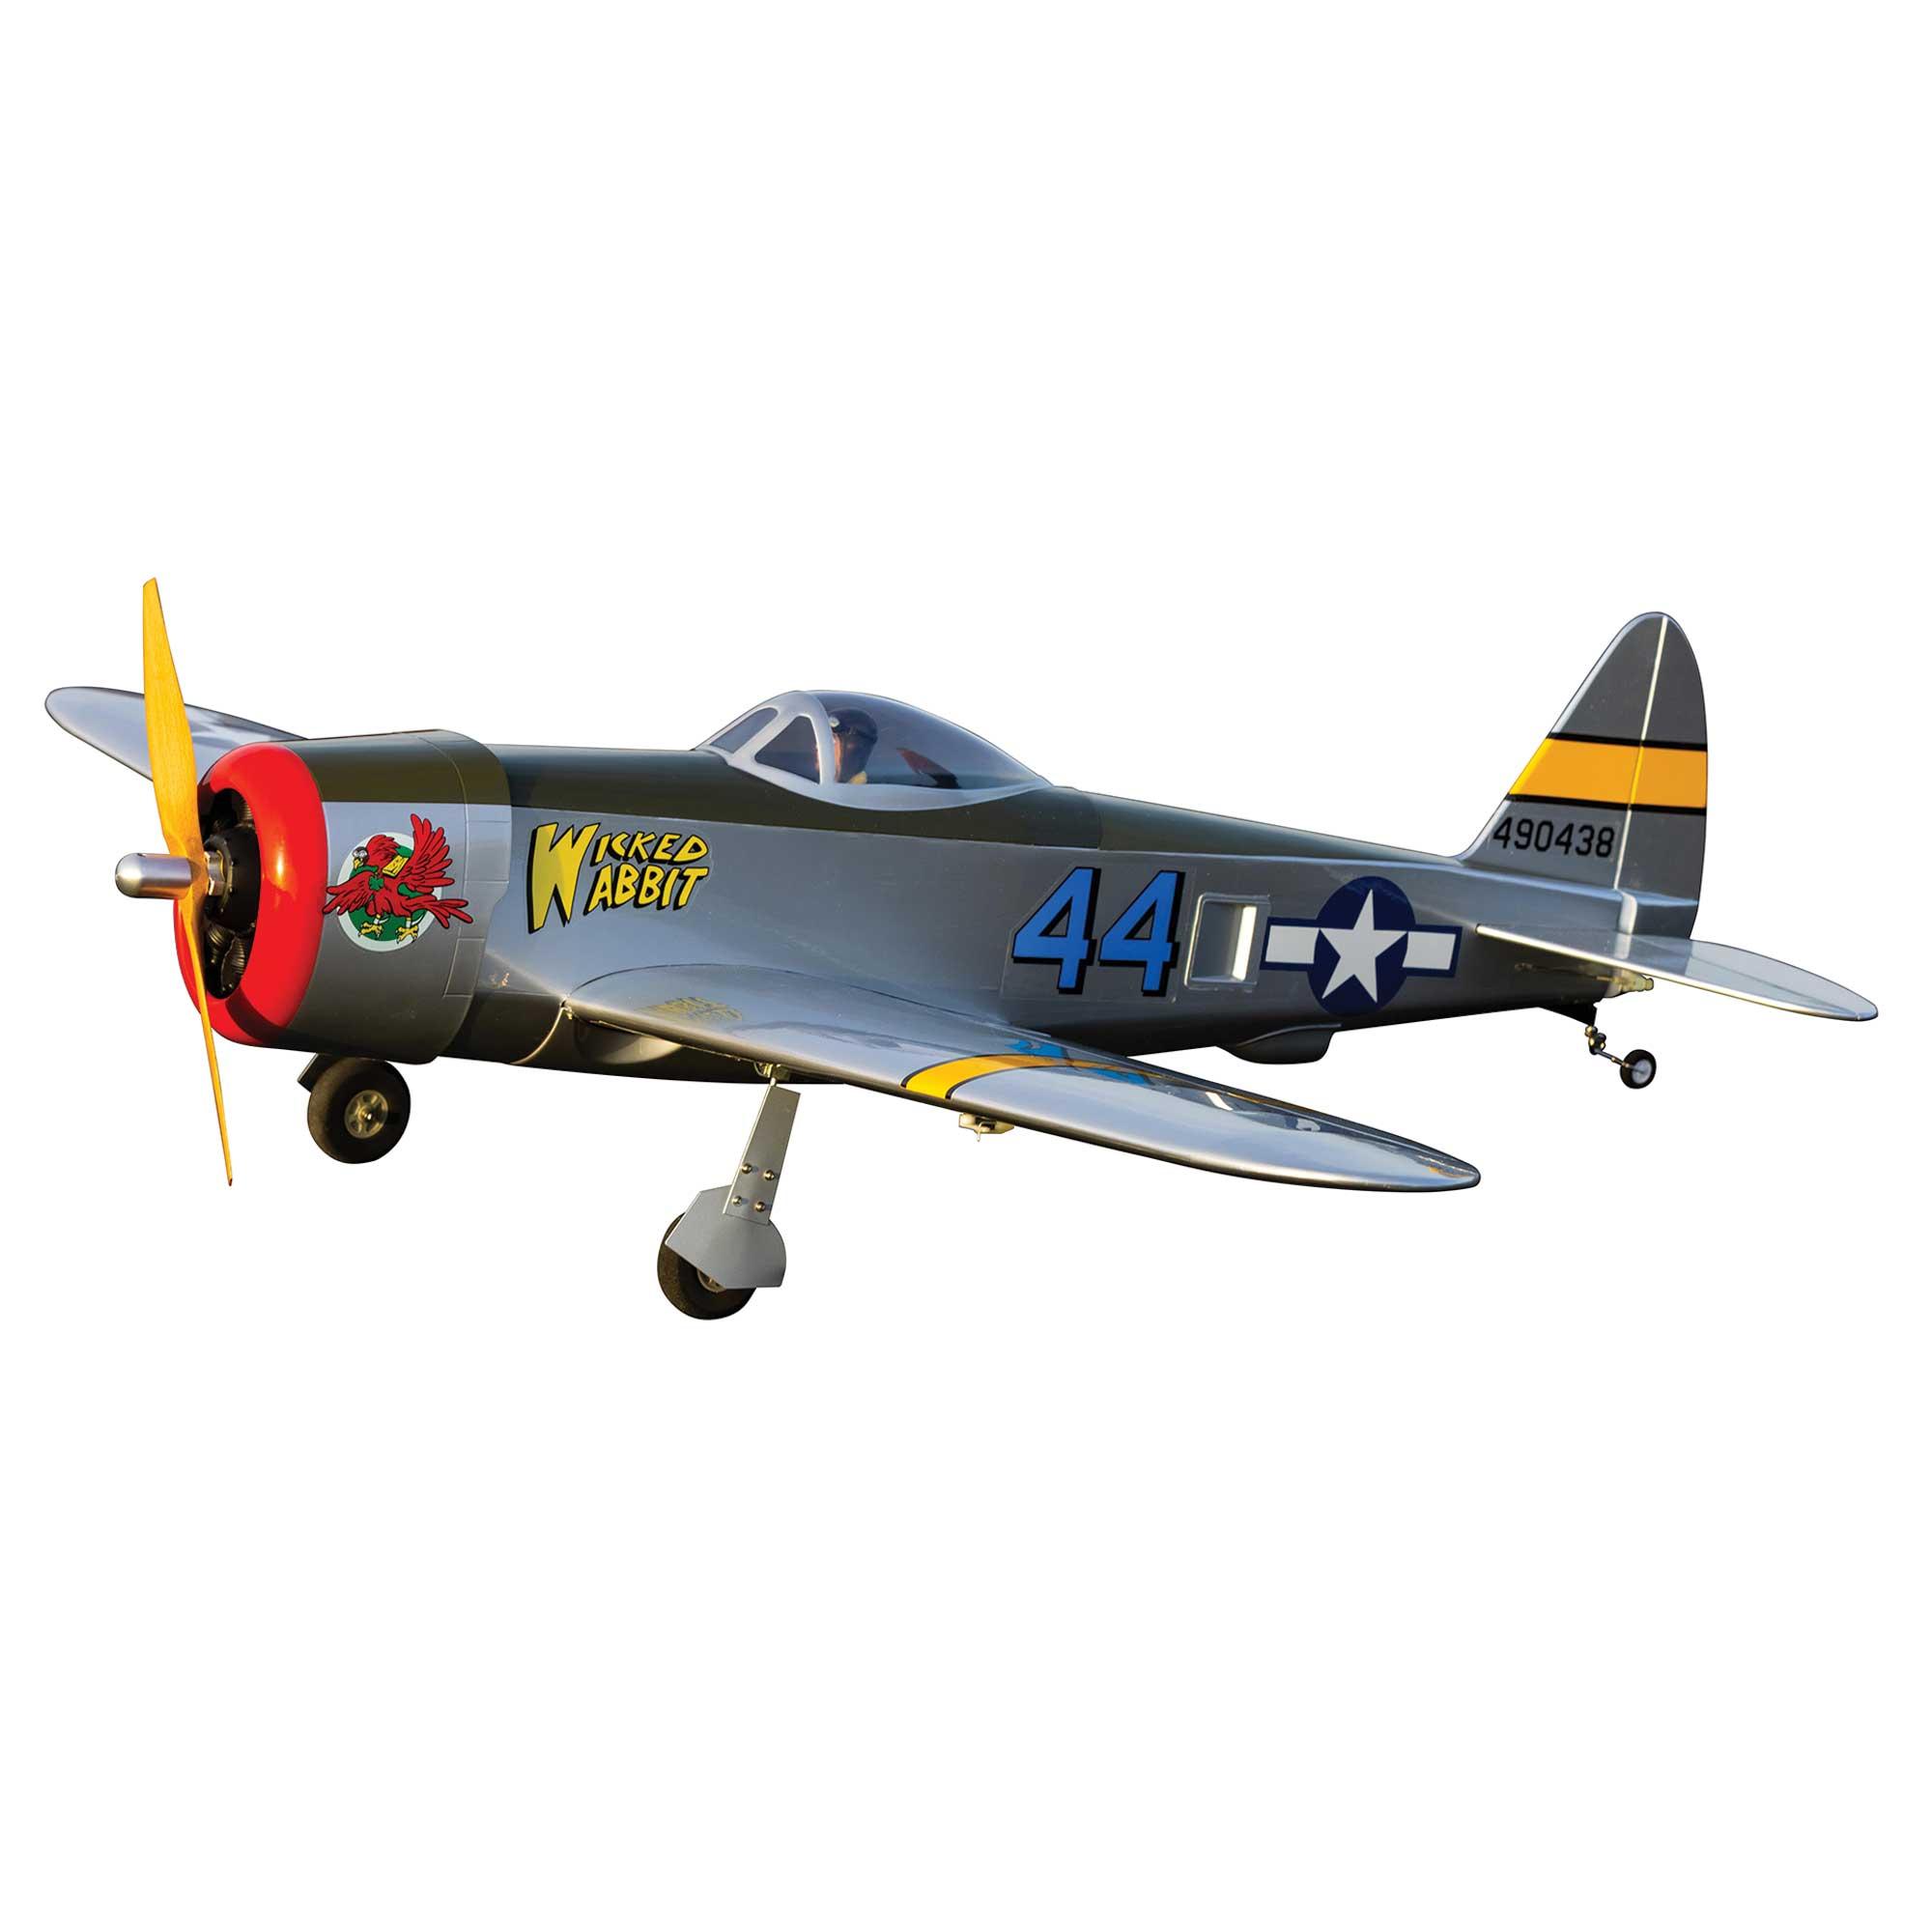 P 47 Rc Airplane: Experienced Fliers: Tips for Enhancing Your P-47 RC Plane Experience